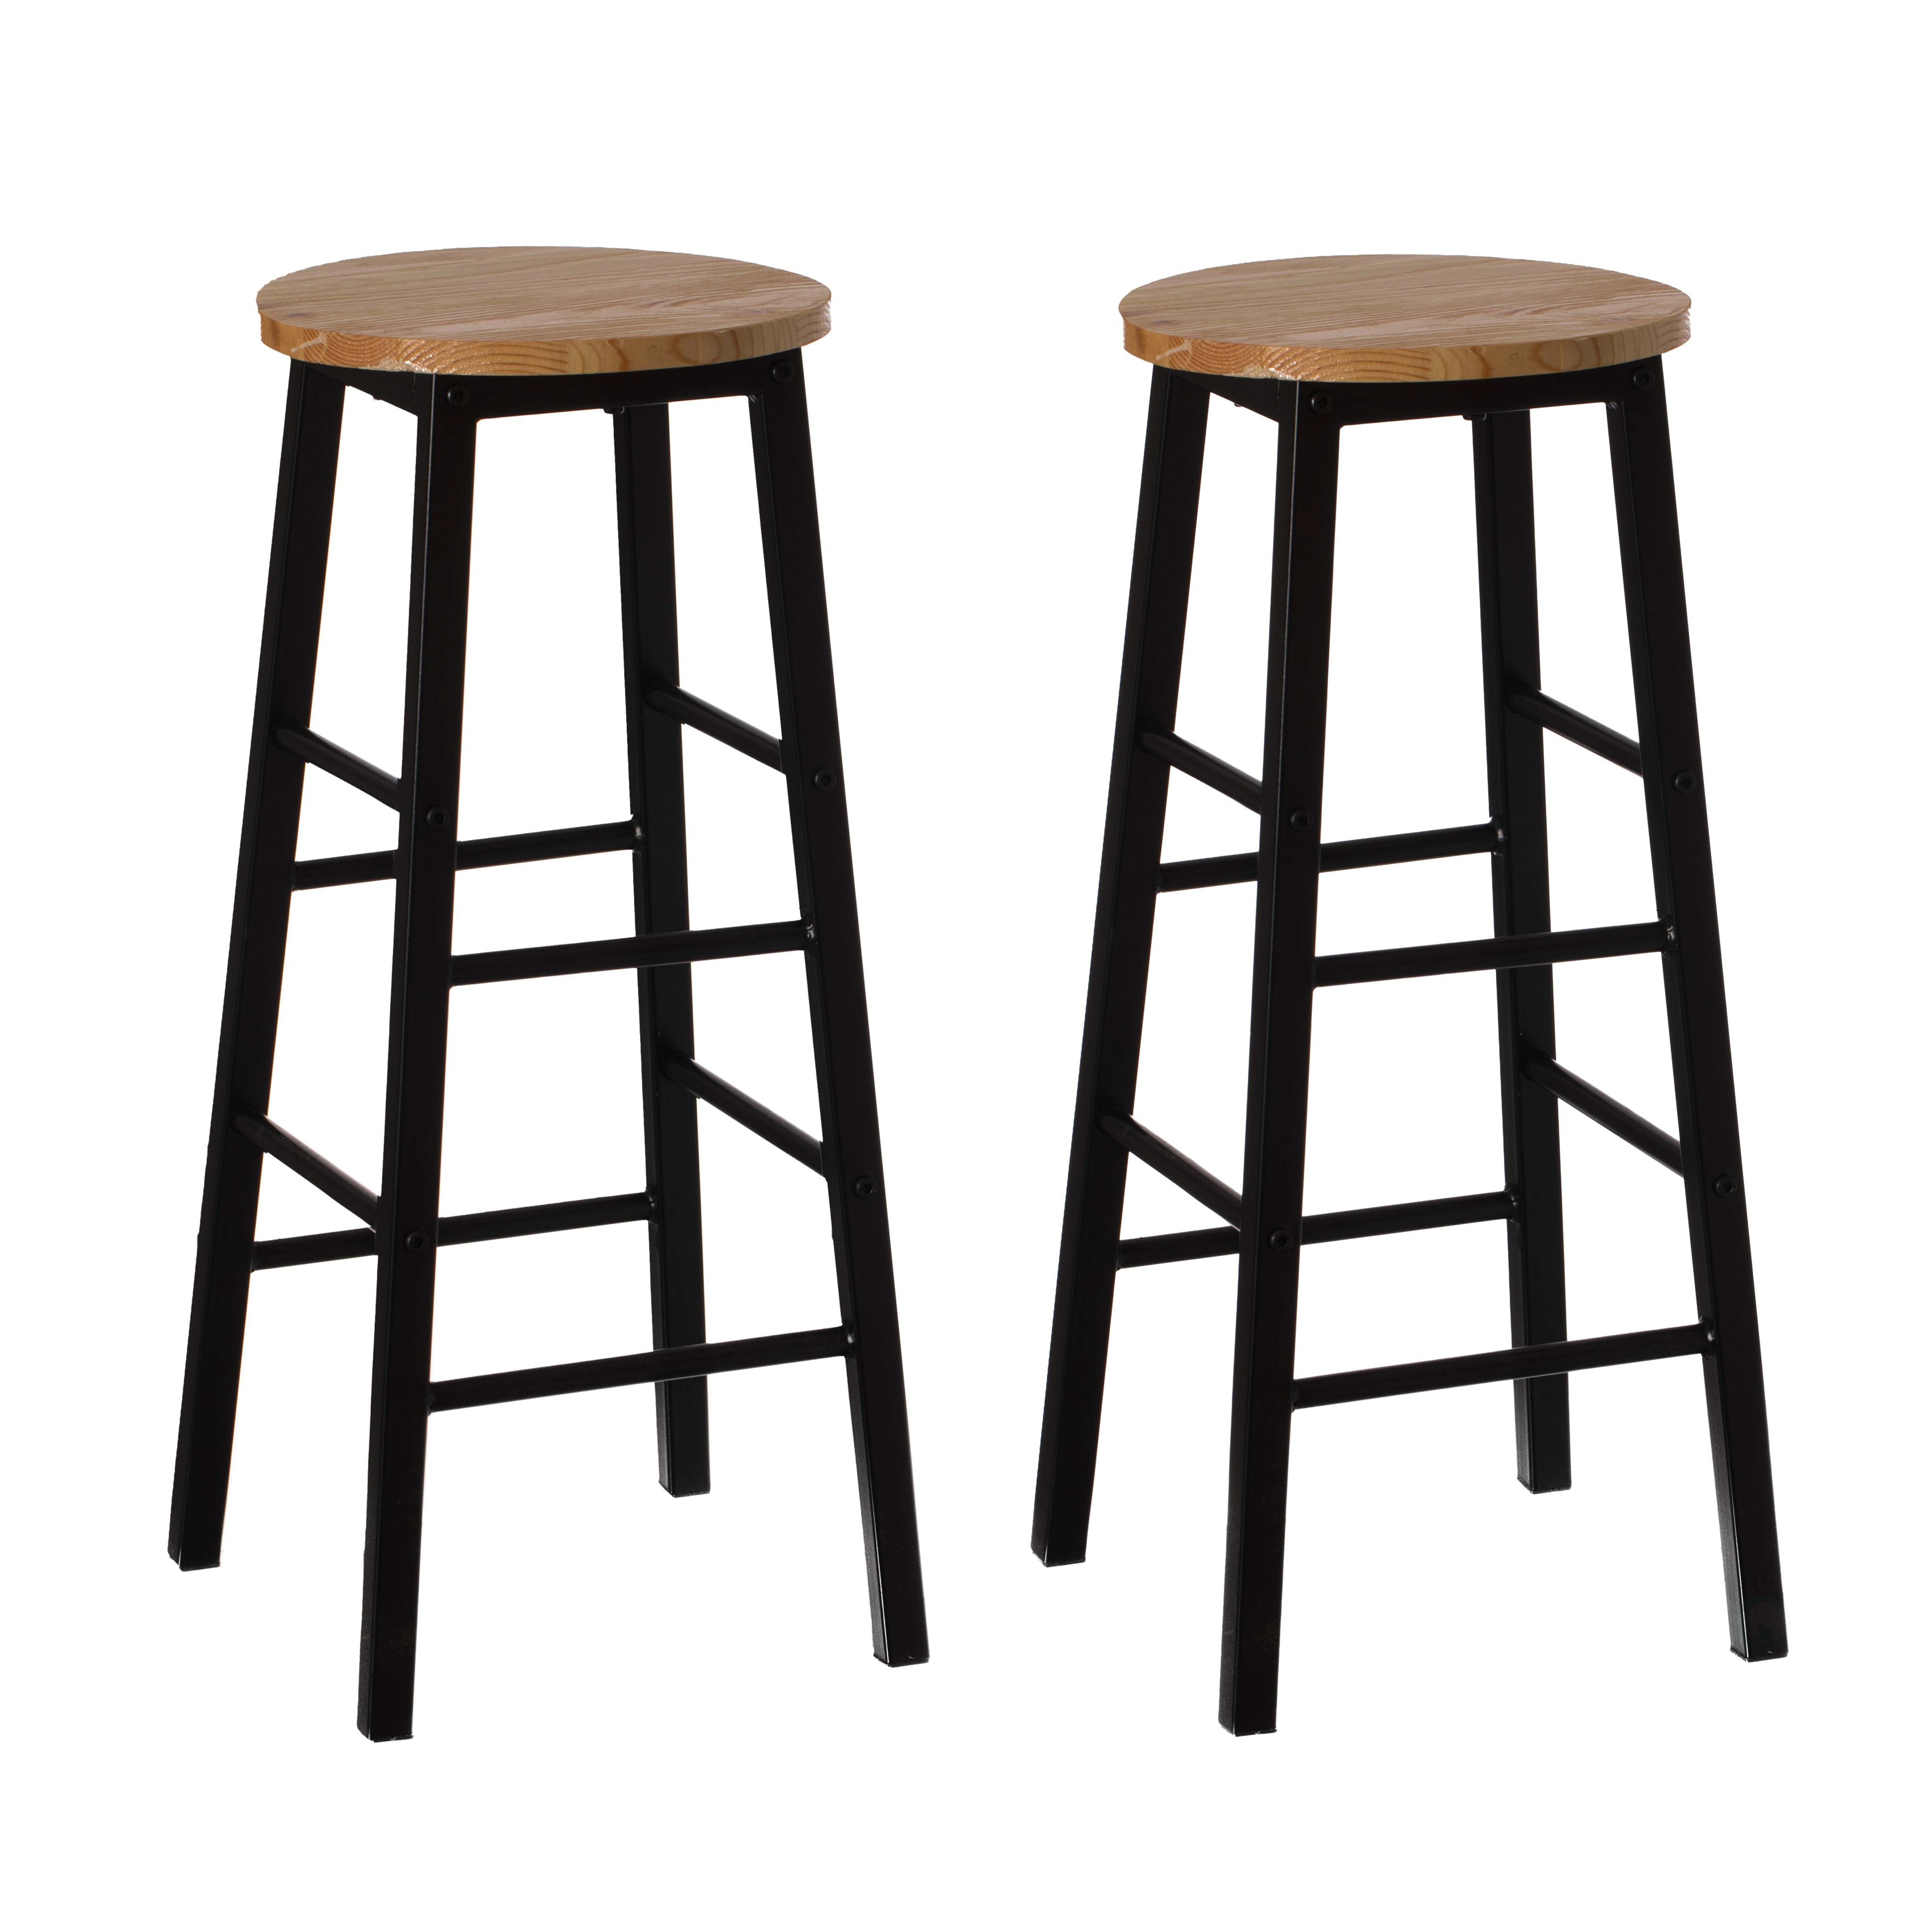 28 High Wooden Rustic Round Bar Stool With Footrest For Indoor And Outdoor - Set Of 2